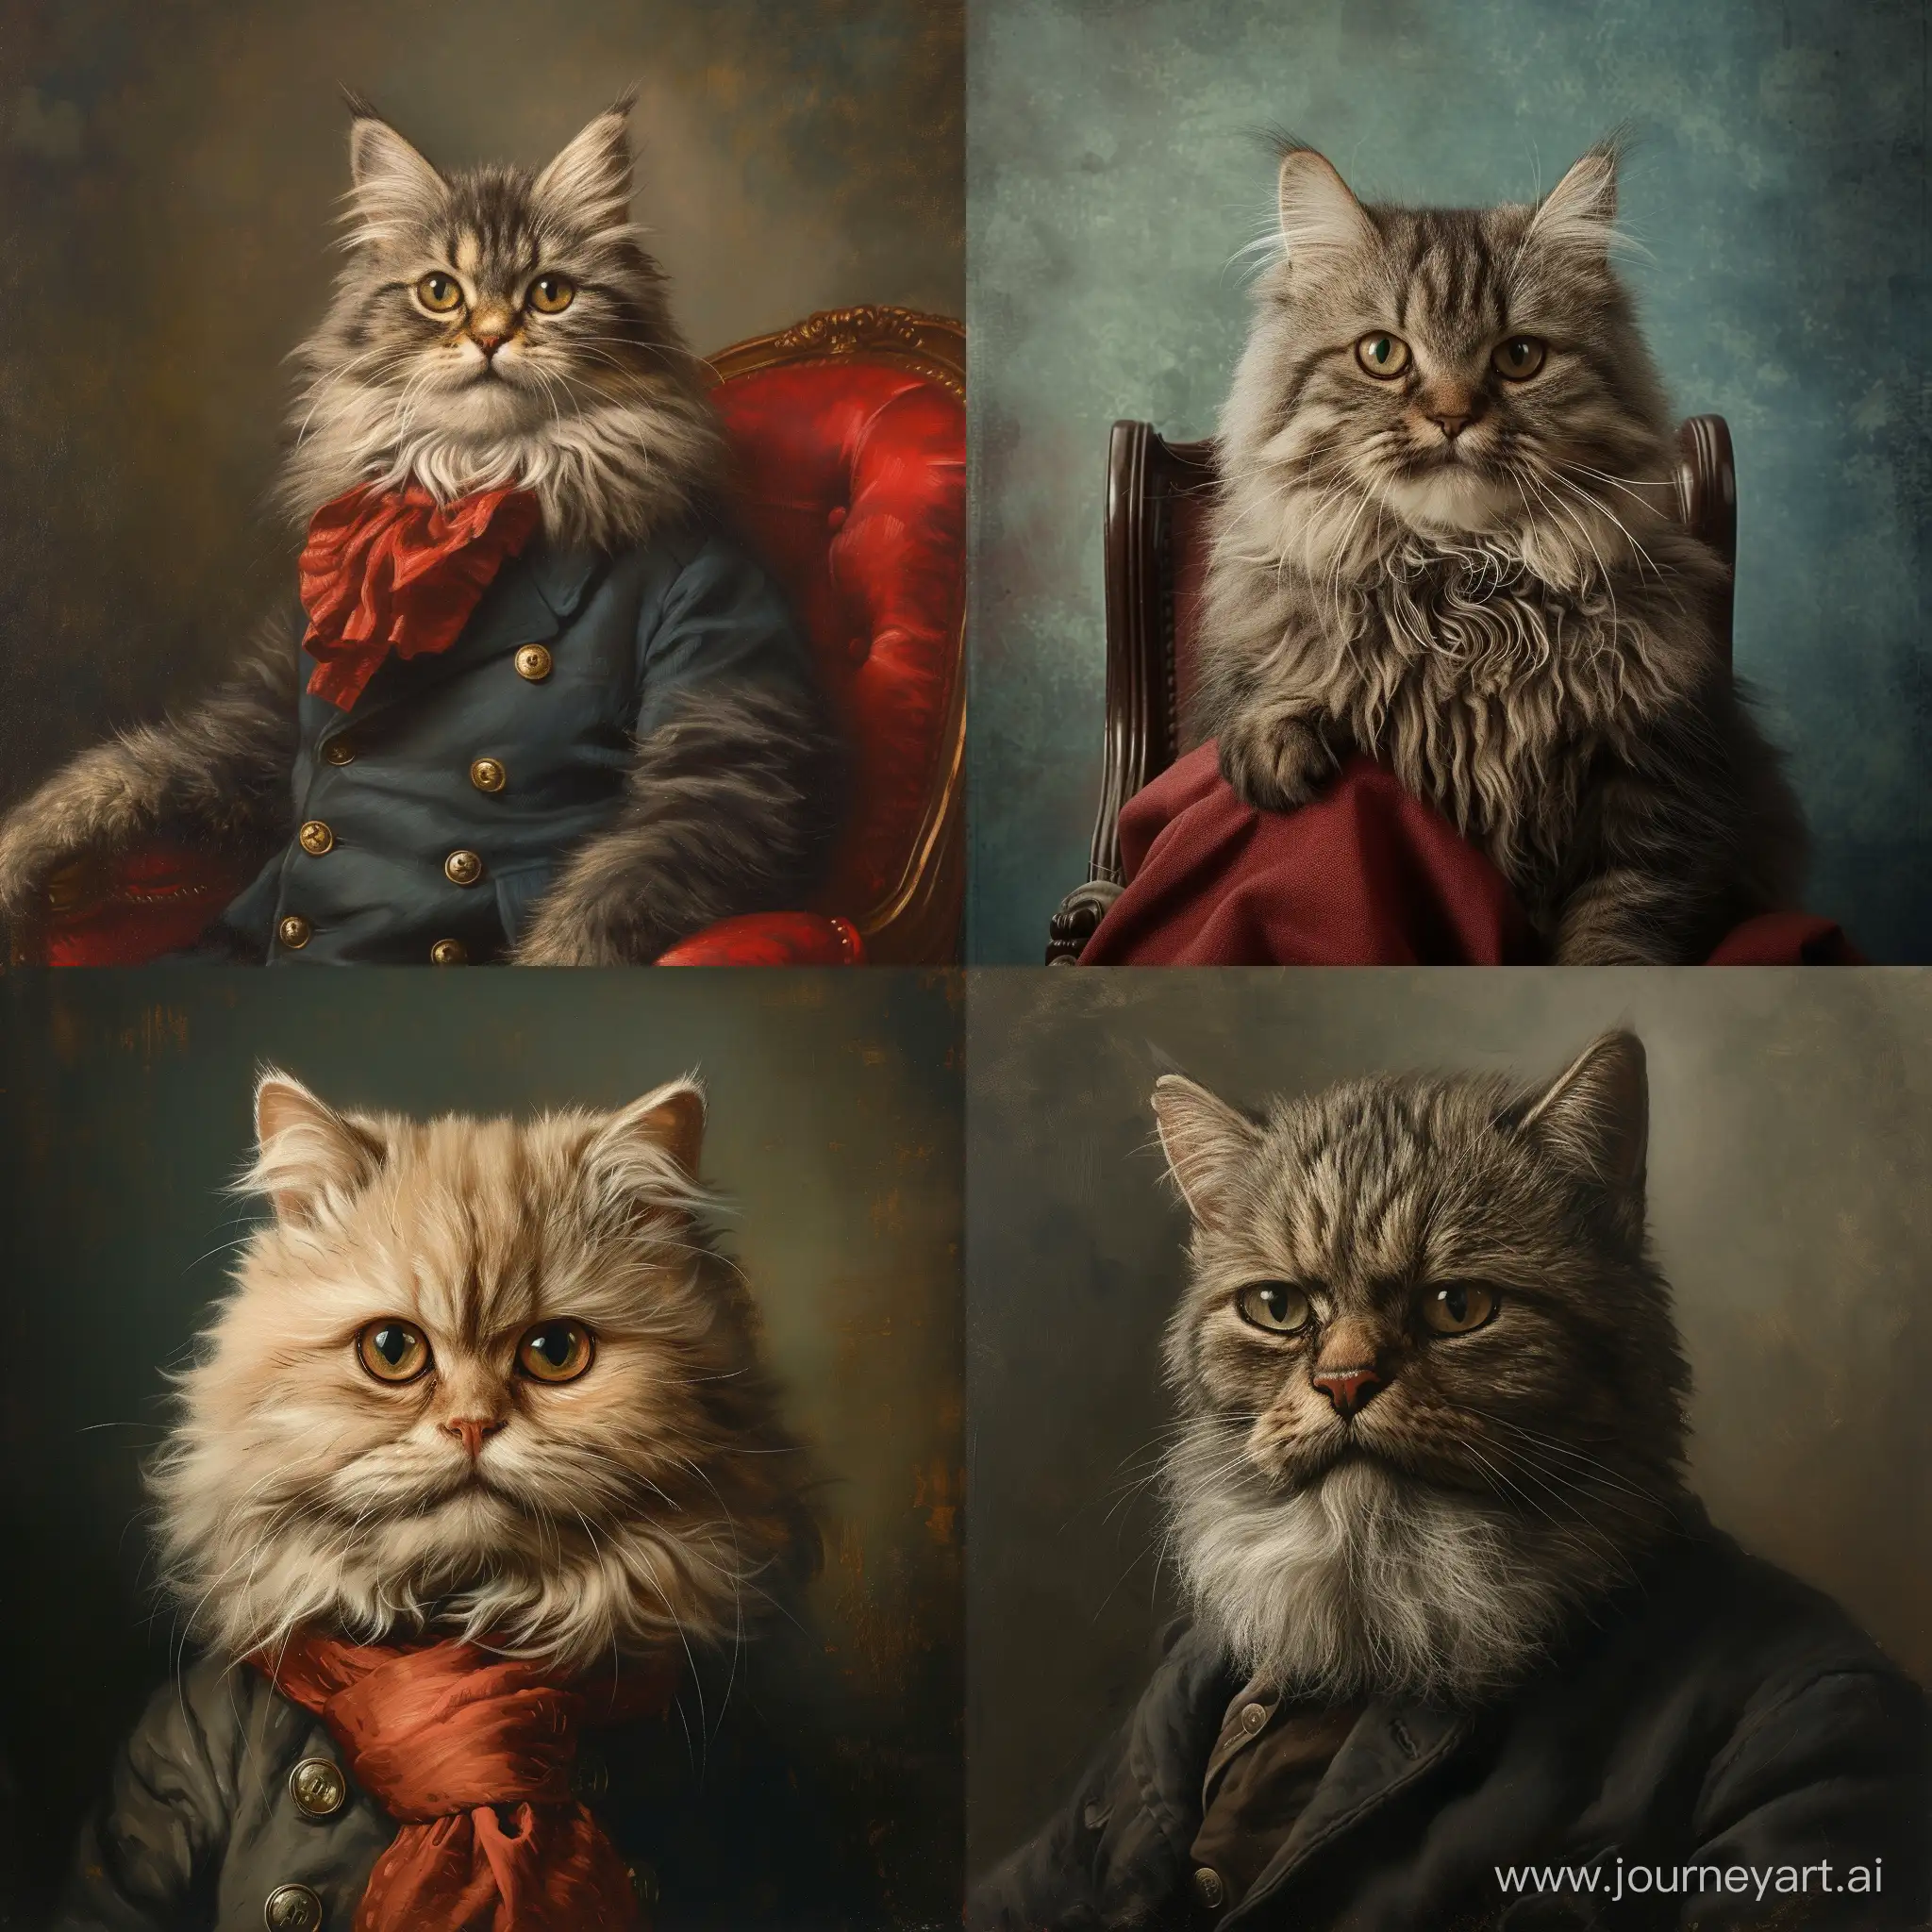 Philosopher-Kitty-Official-Portrait-Inspired-by-Karl-Marx